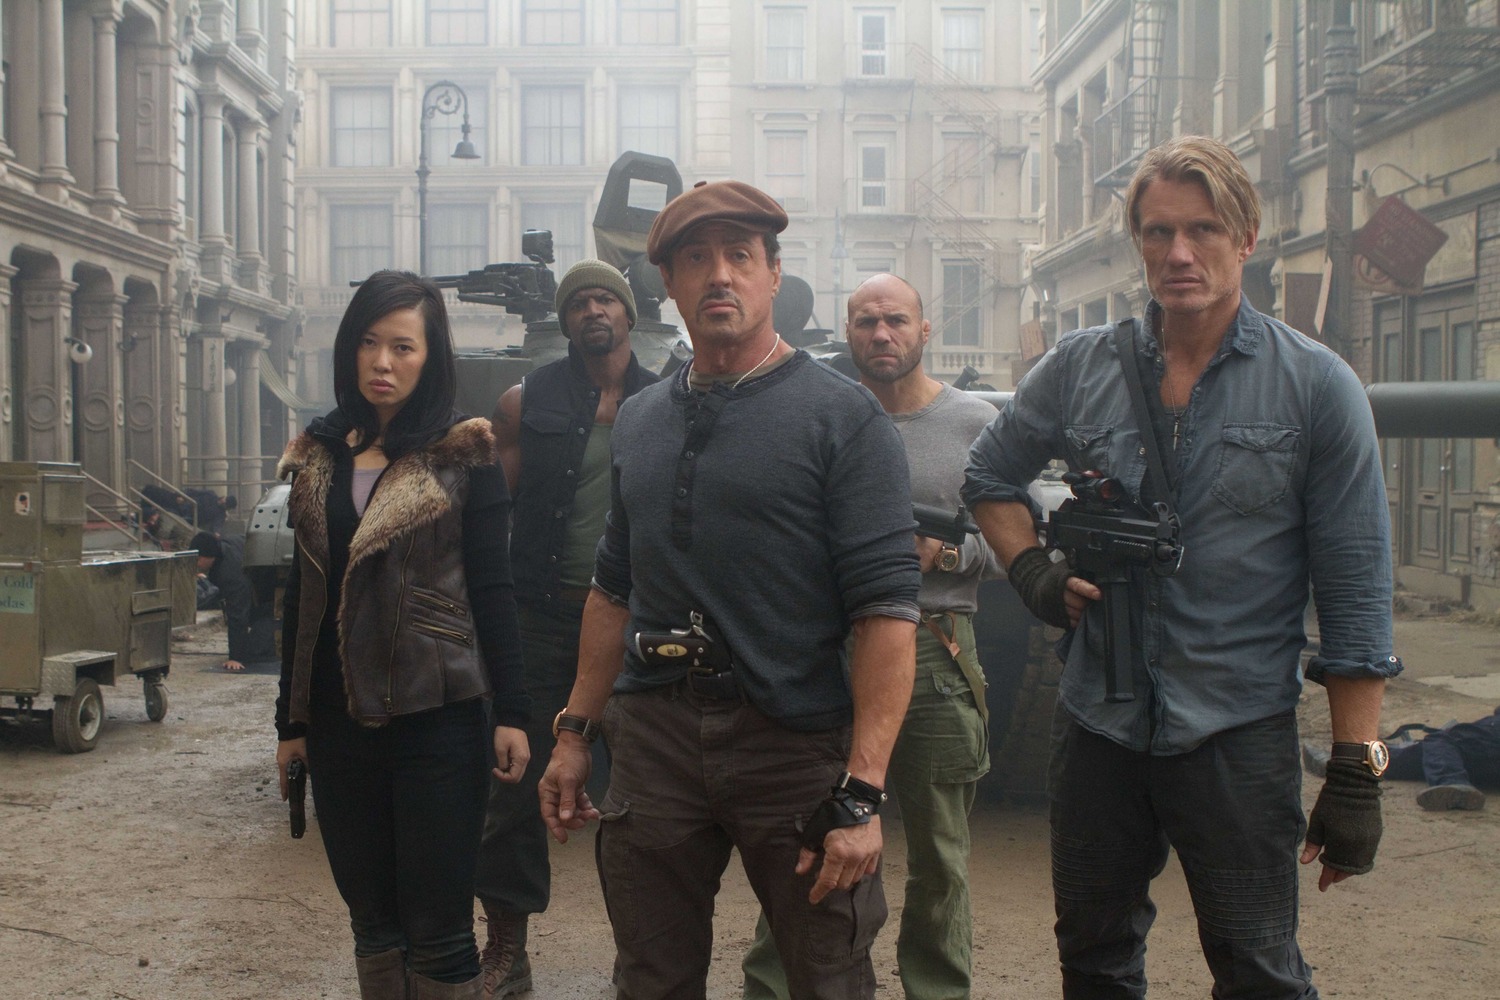 expendables-2-unite-speciale-the-expendables-2-22-08-2012-24-g.jpg